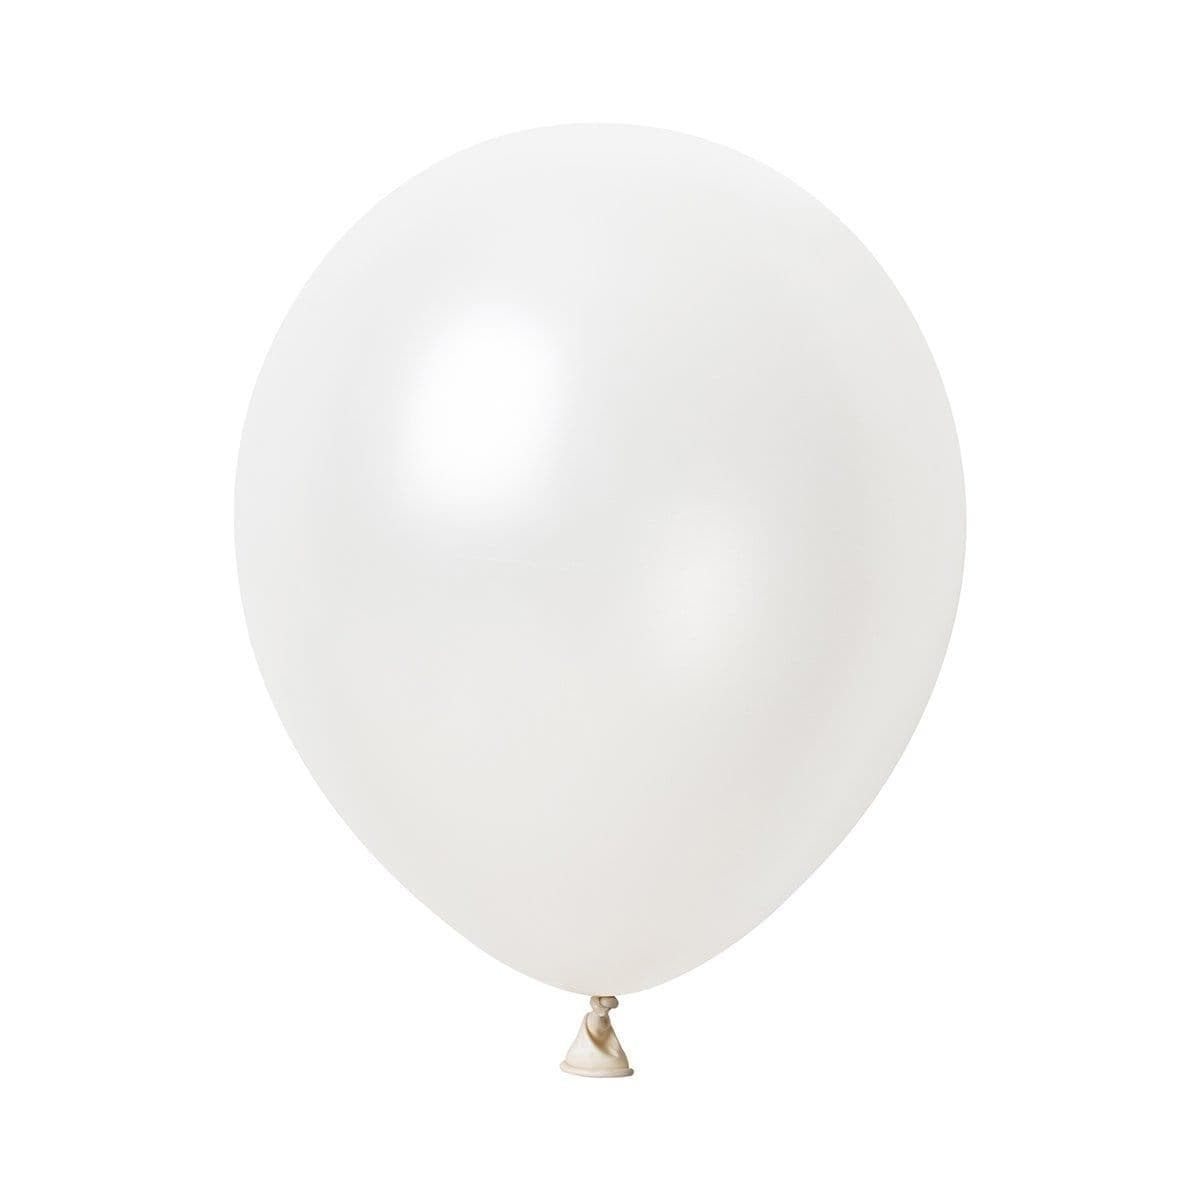 Buy Balloons White Latex Balloon 5 Inches, Pearl Collection, 100 Count sold at Party Expert